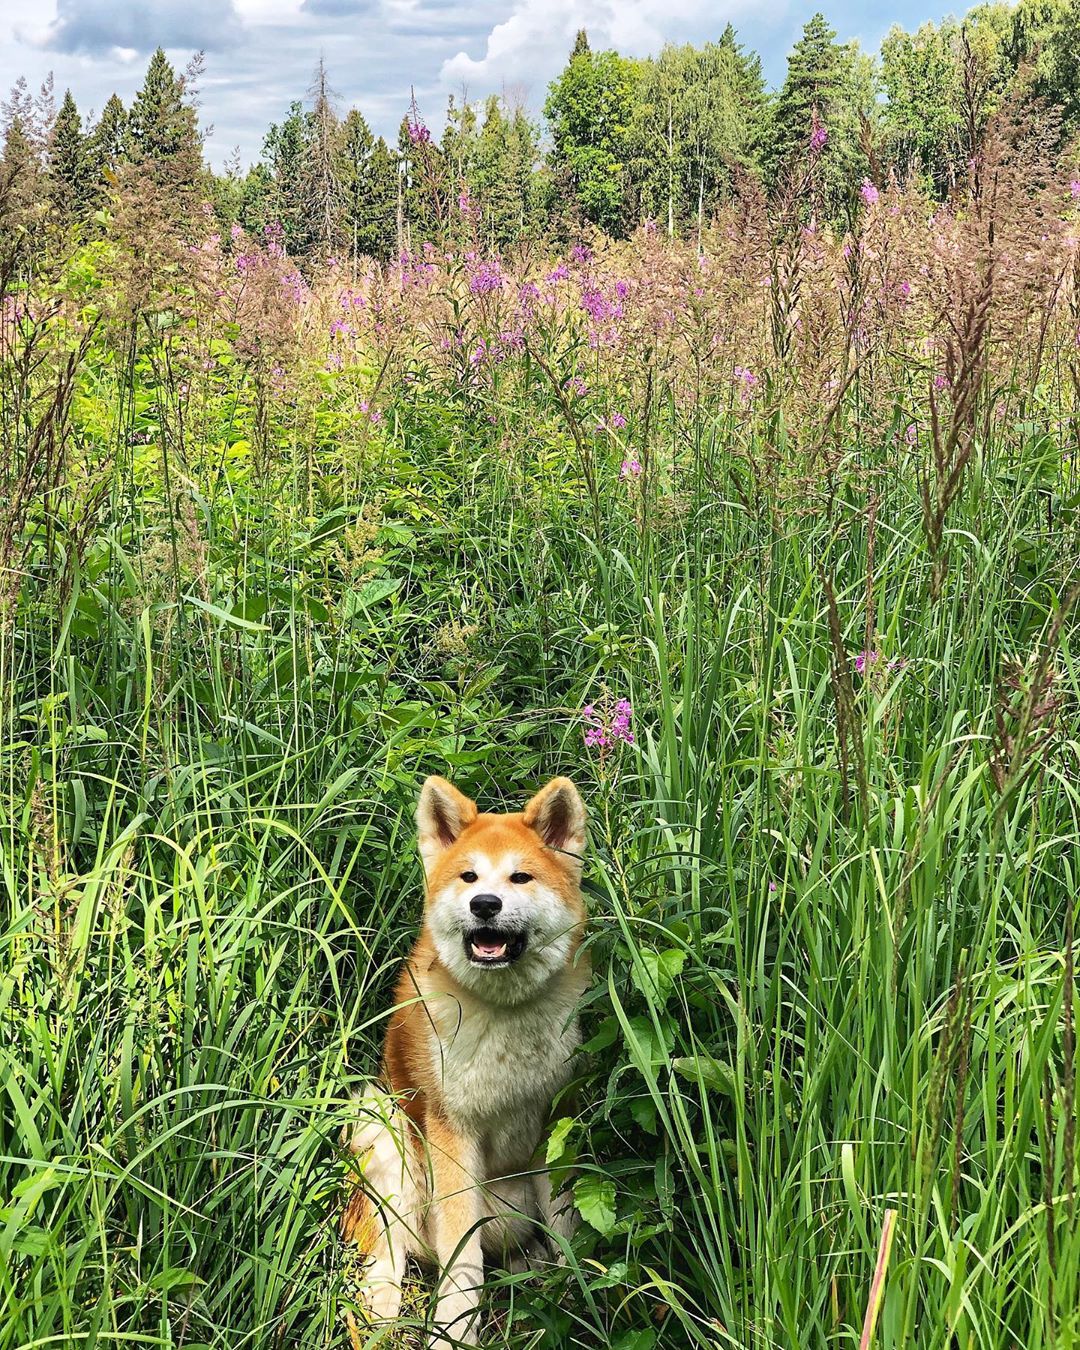 Akita Inu sitting in the middle of the field of grass